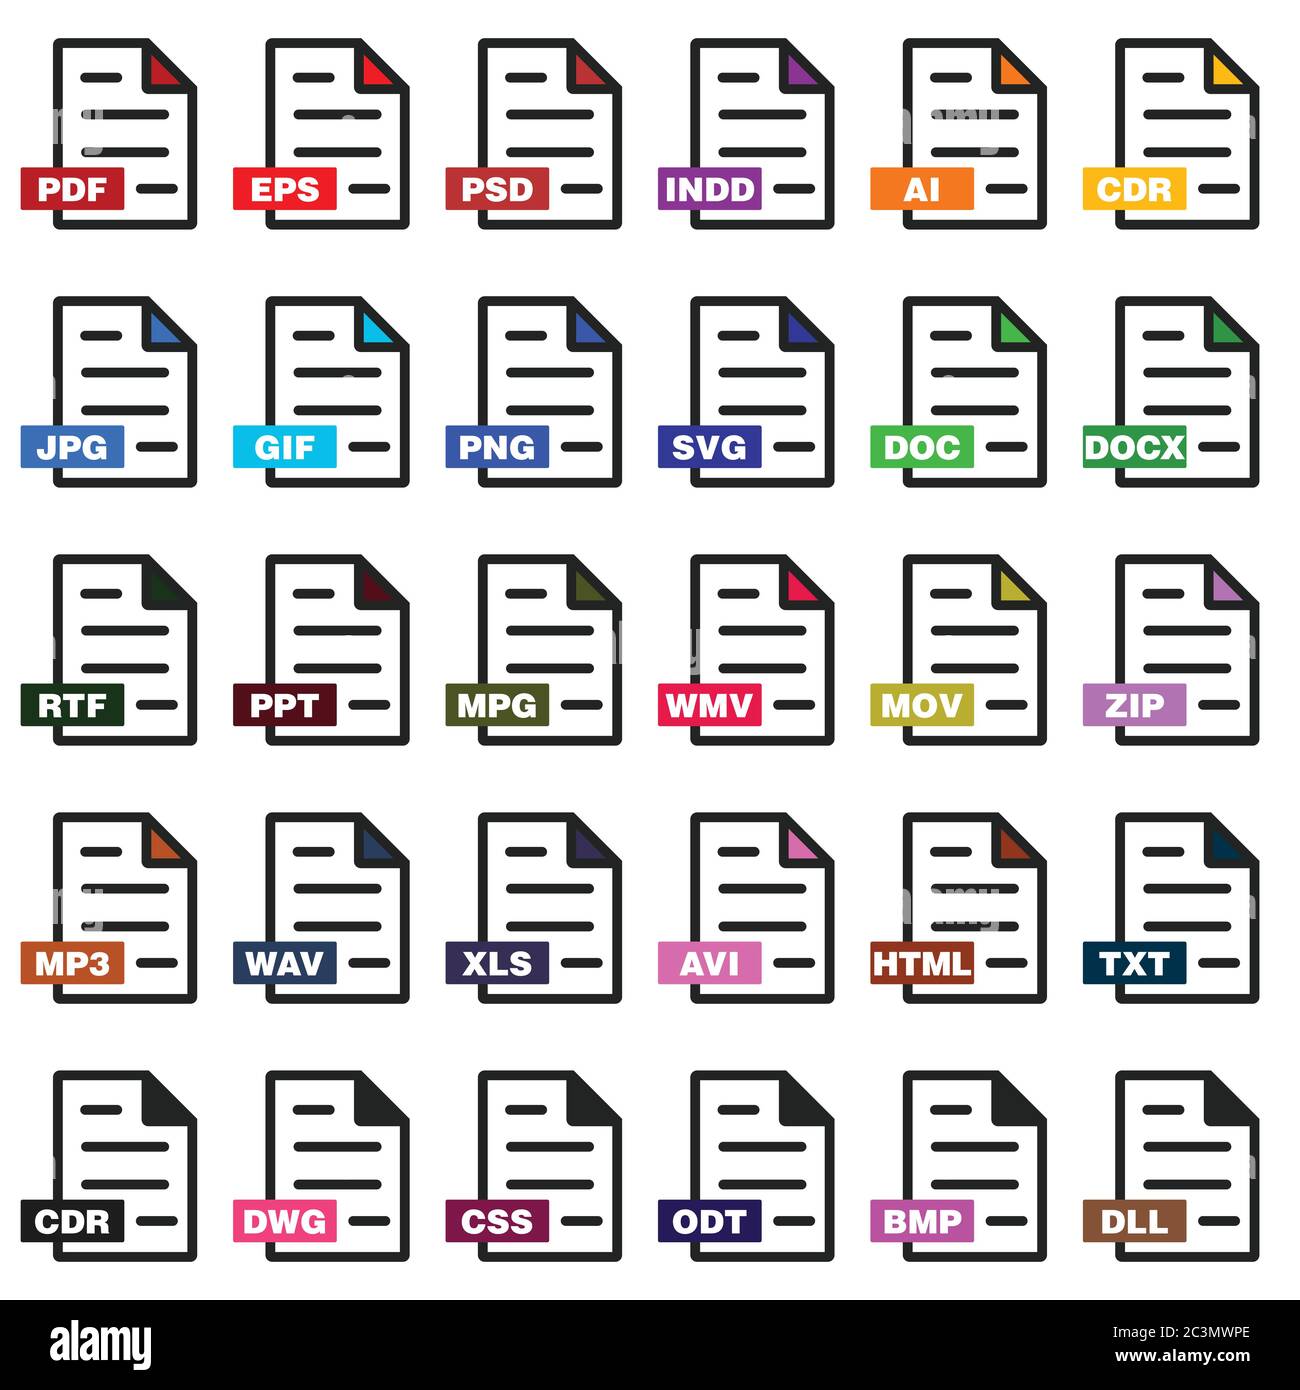 40 File type / File extension icon